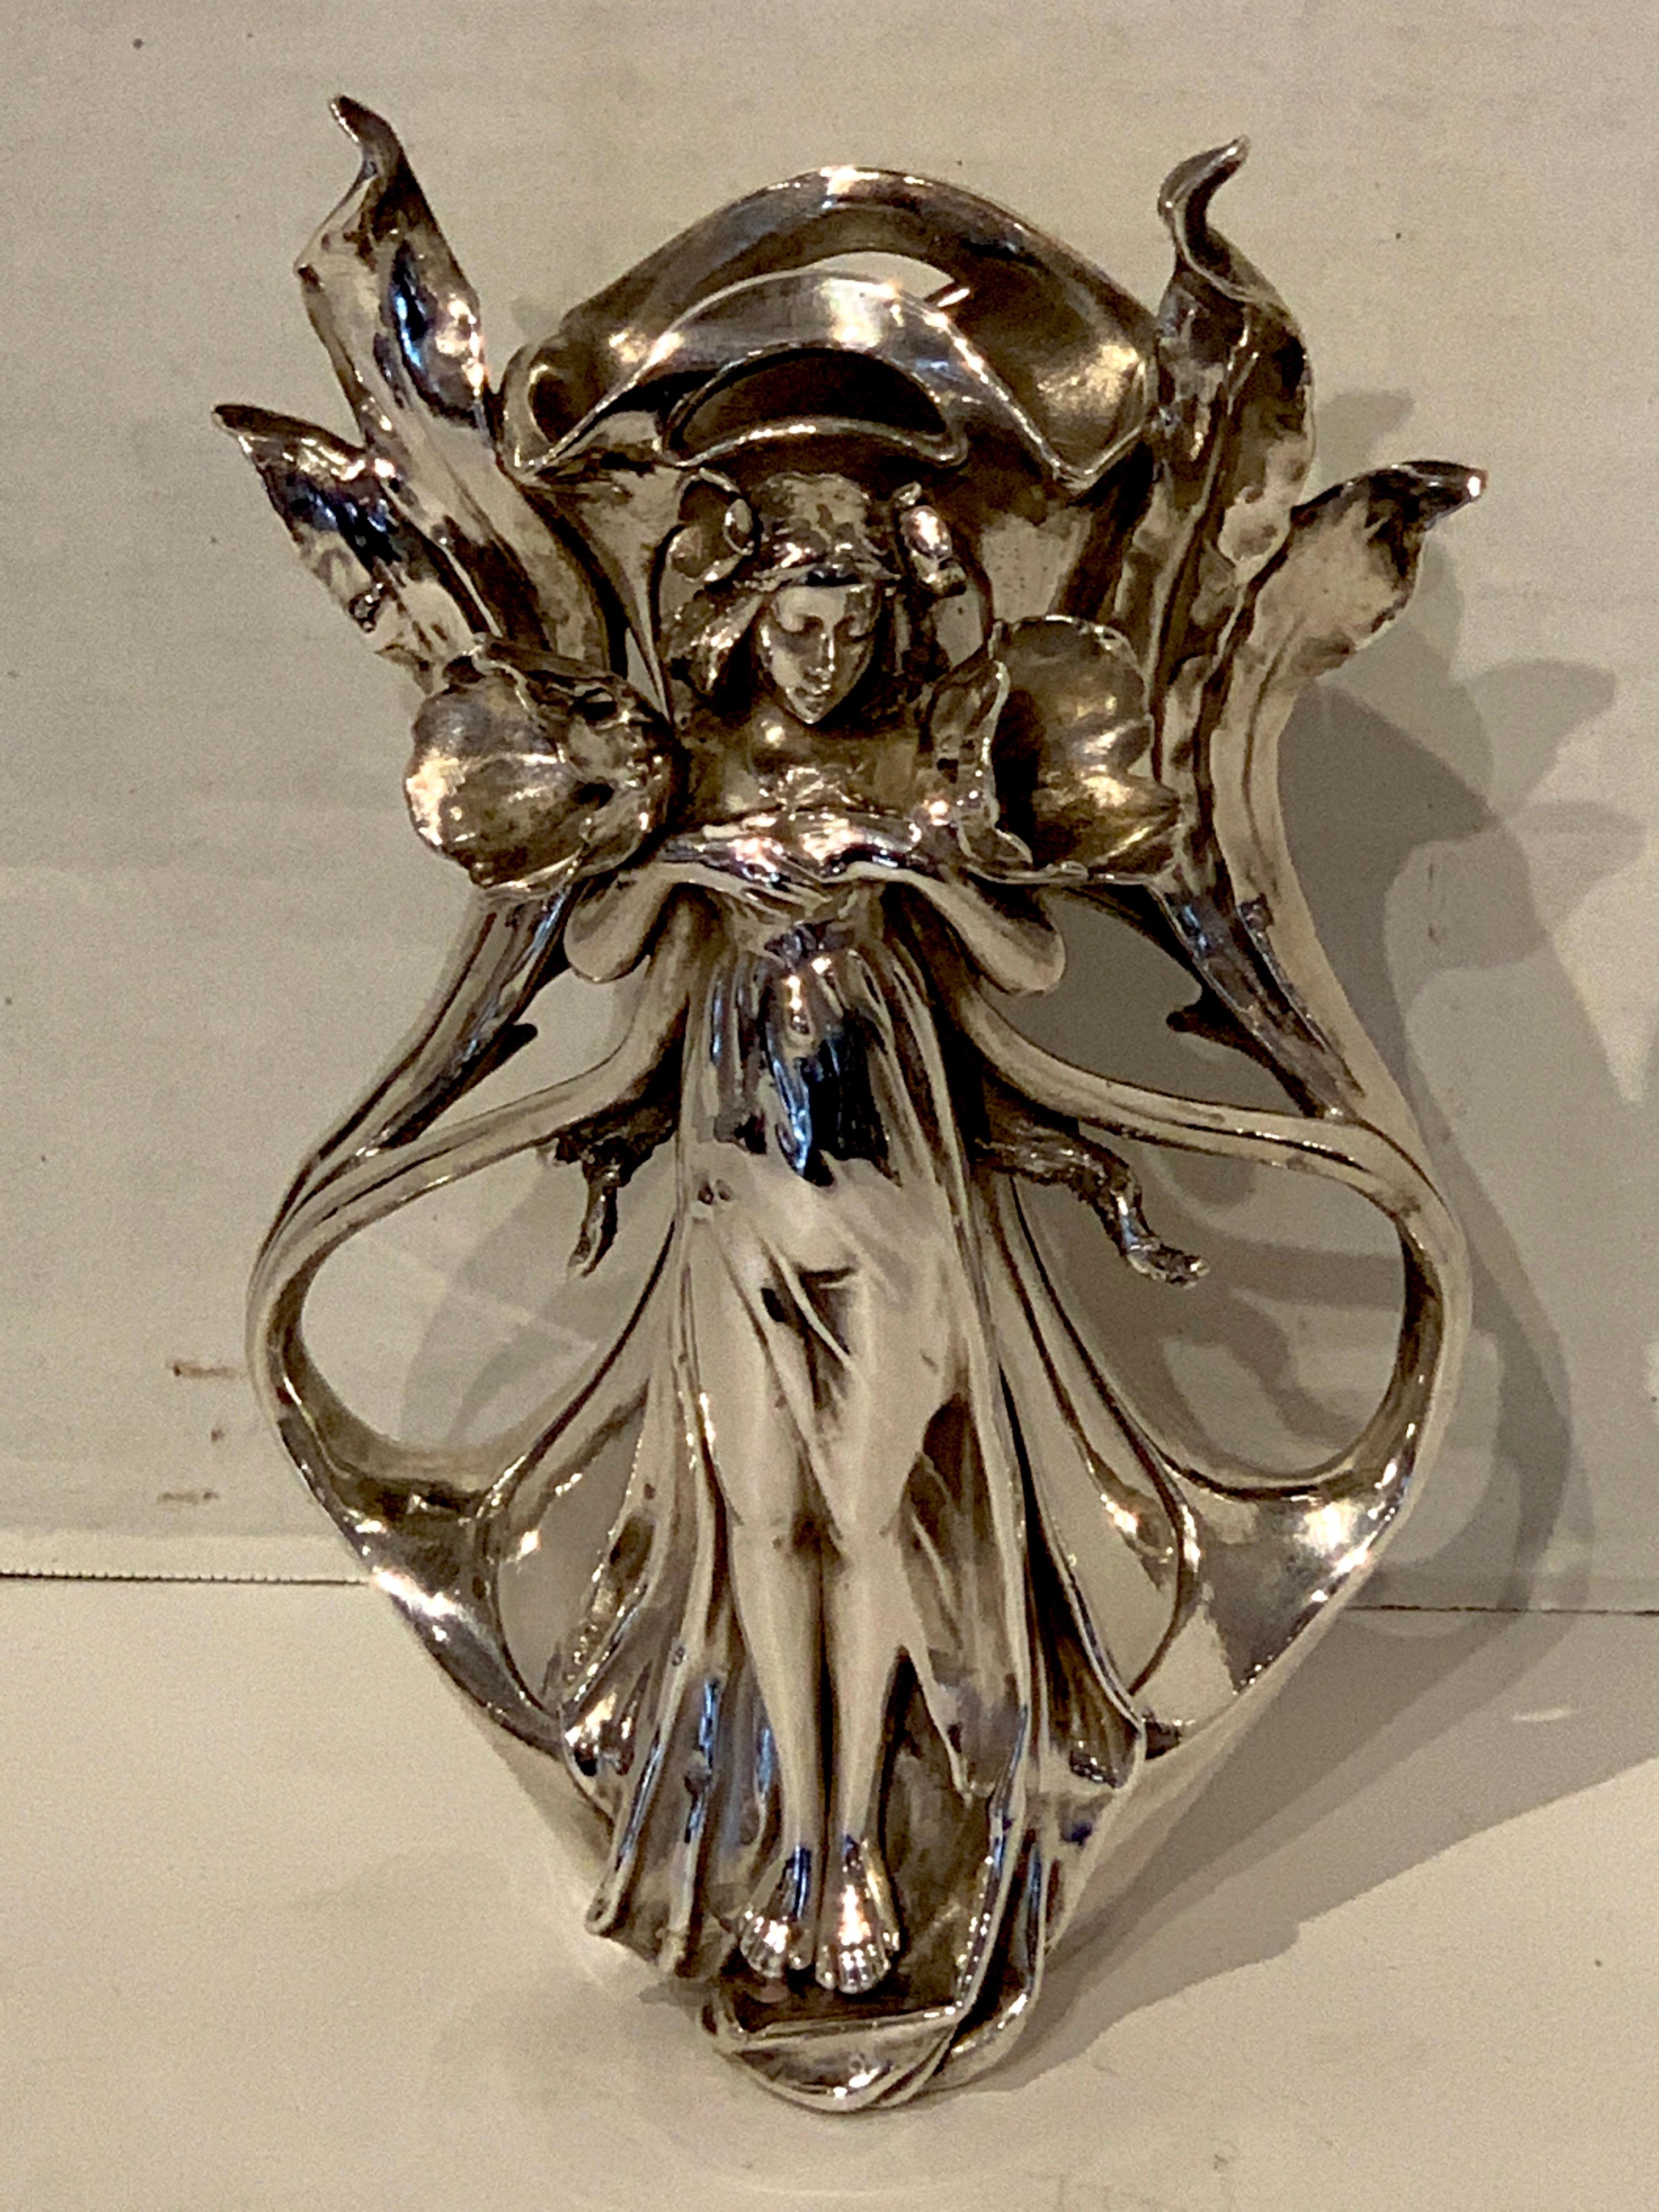 Art Nouveau silver overlay figural vase with standing draped female figure flanked by two flowers, with pierced vase. Sterling over porcelain, numbered # 3222, with cypher mark.